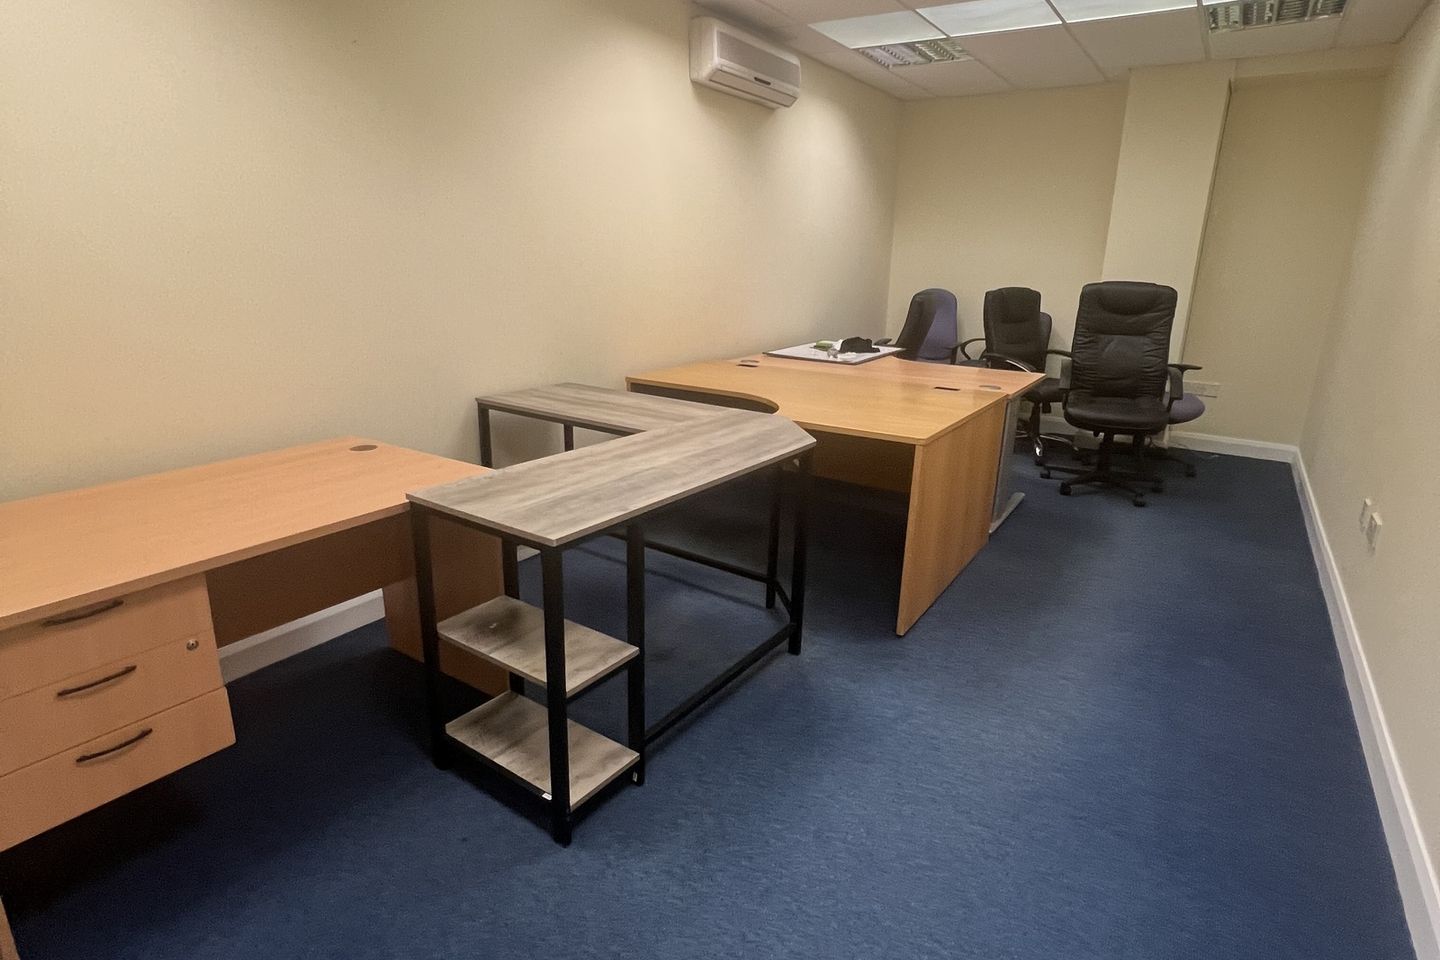 Unit 12, Glenrock Business Park, Galway City, Co. Galway